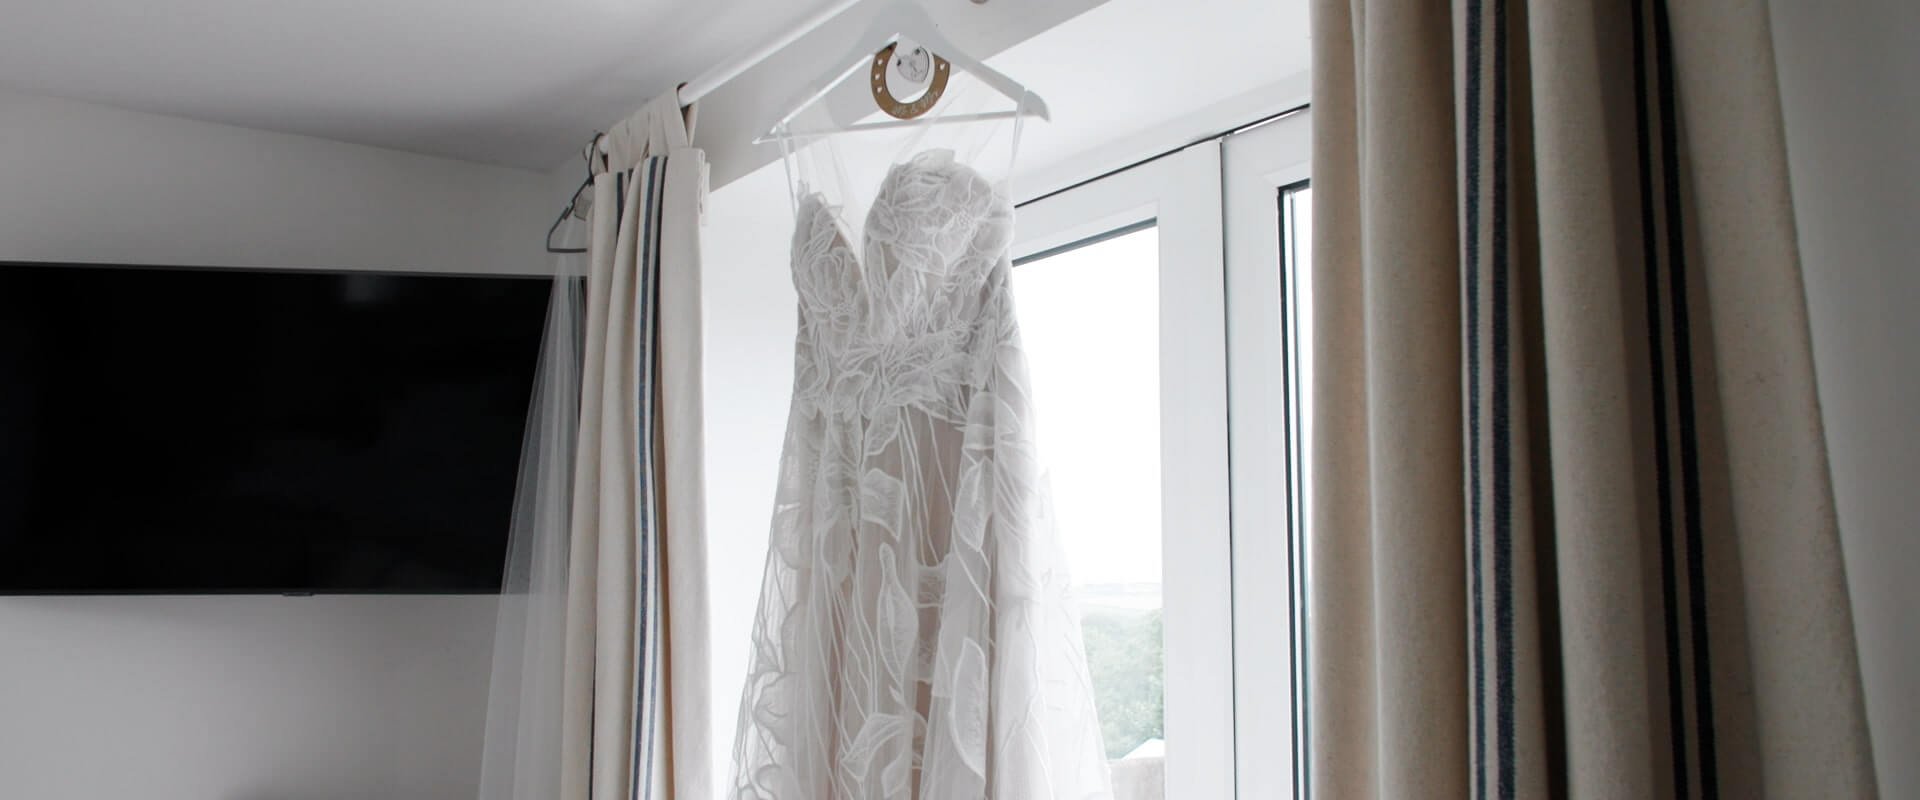 Stunning wedding dress hangs from the window inside The Gate's bridal cottage